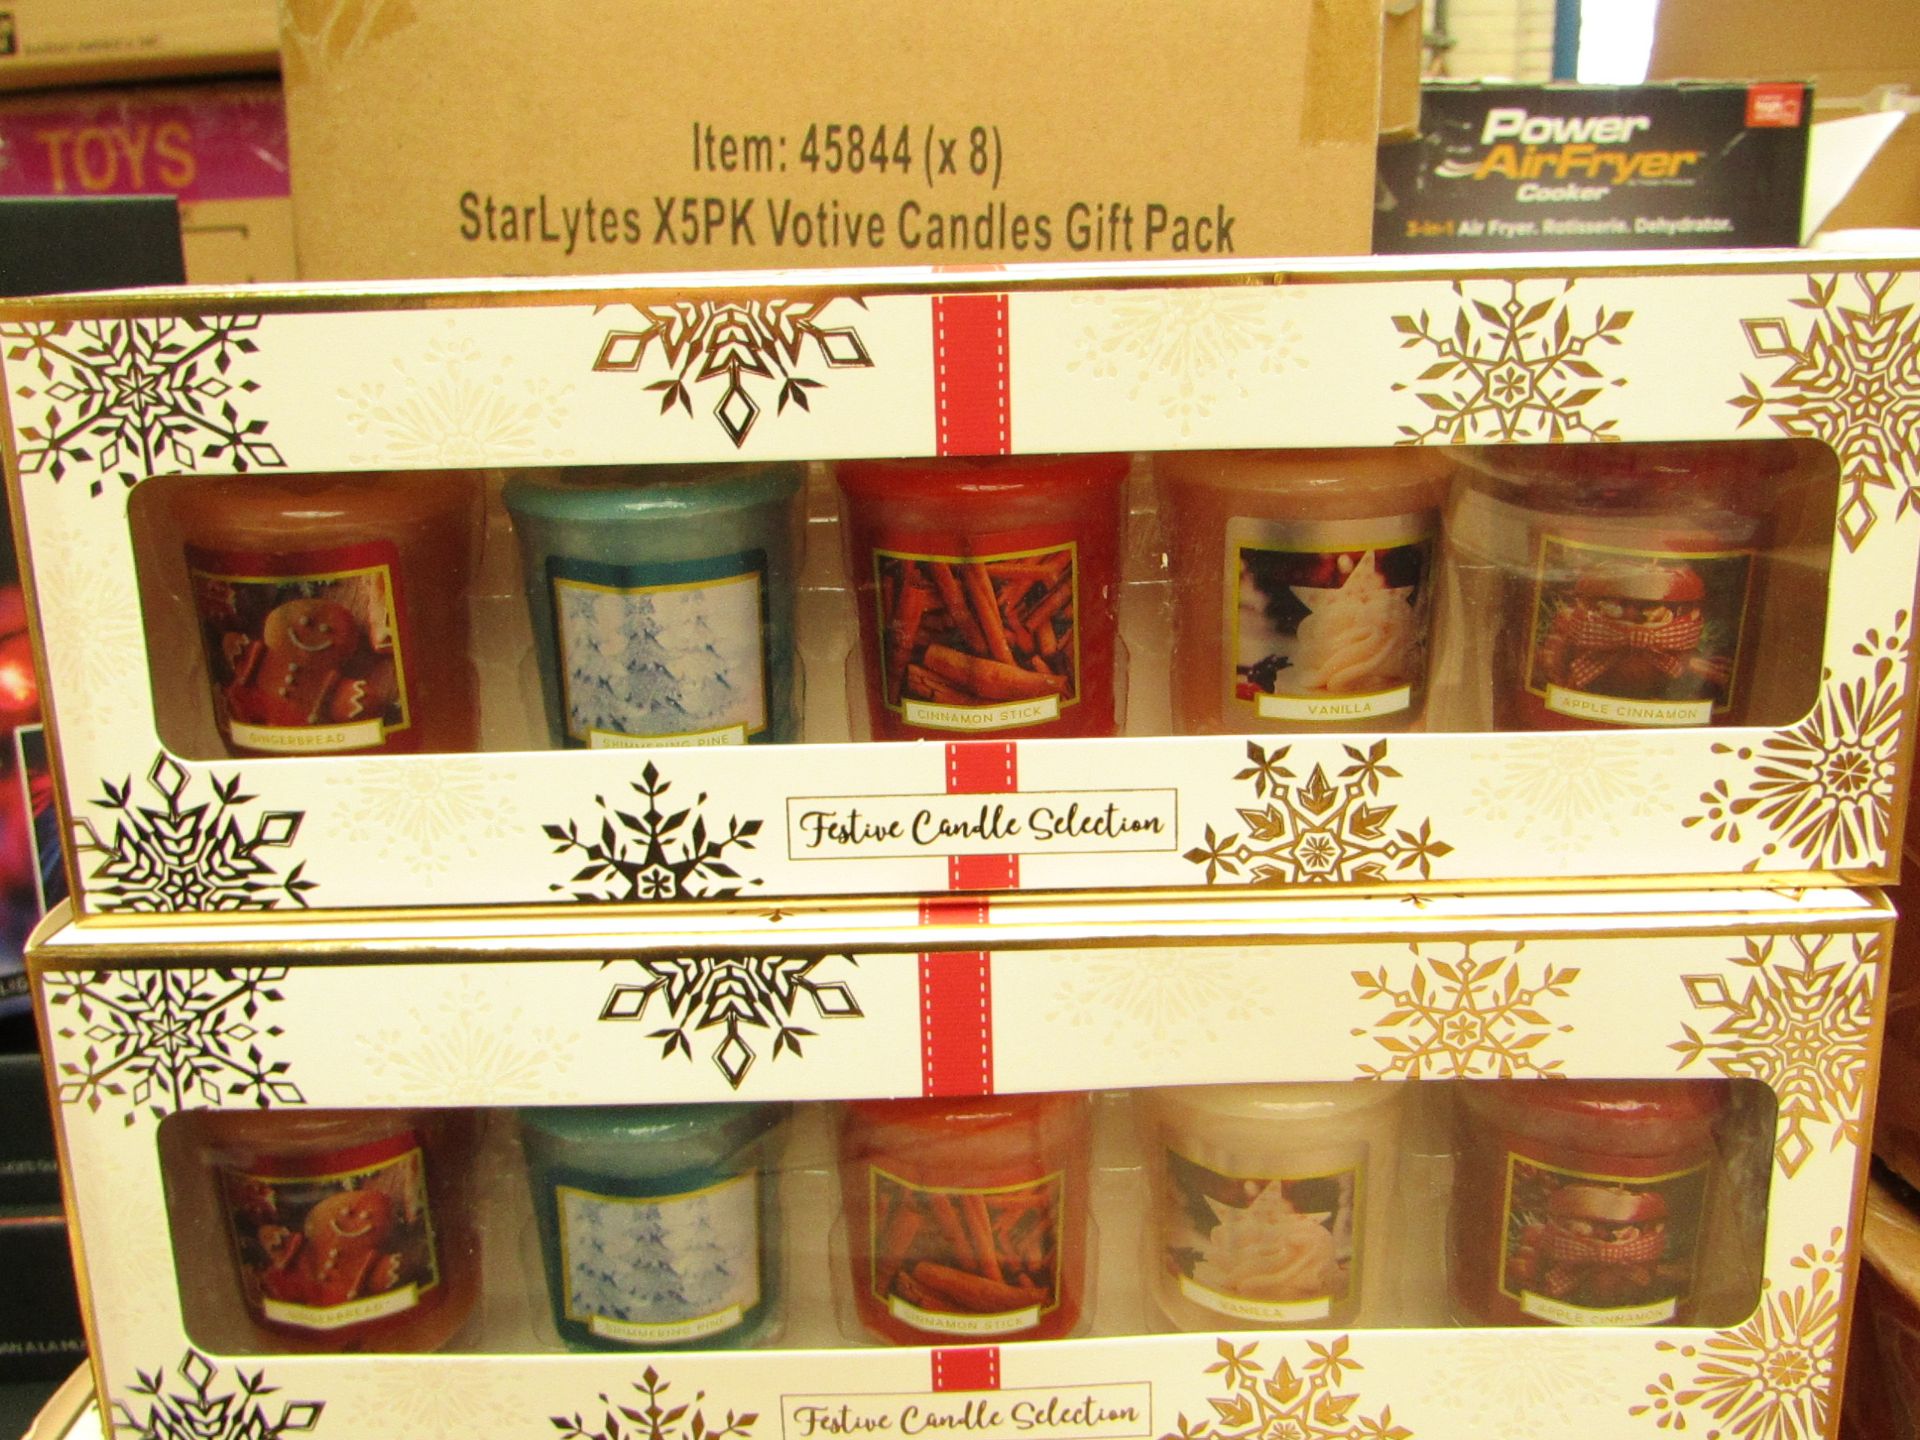 3 Packs of 5 Festice Candle Selection. Incl Cinnamon,Gingerbread,Vanilla etc. New & Packaged